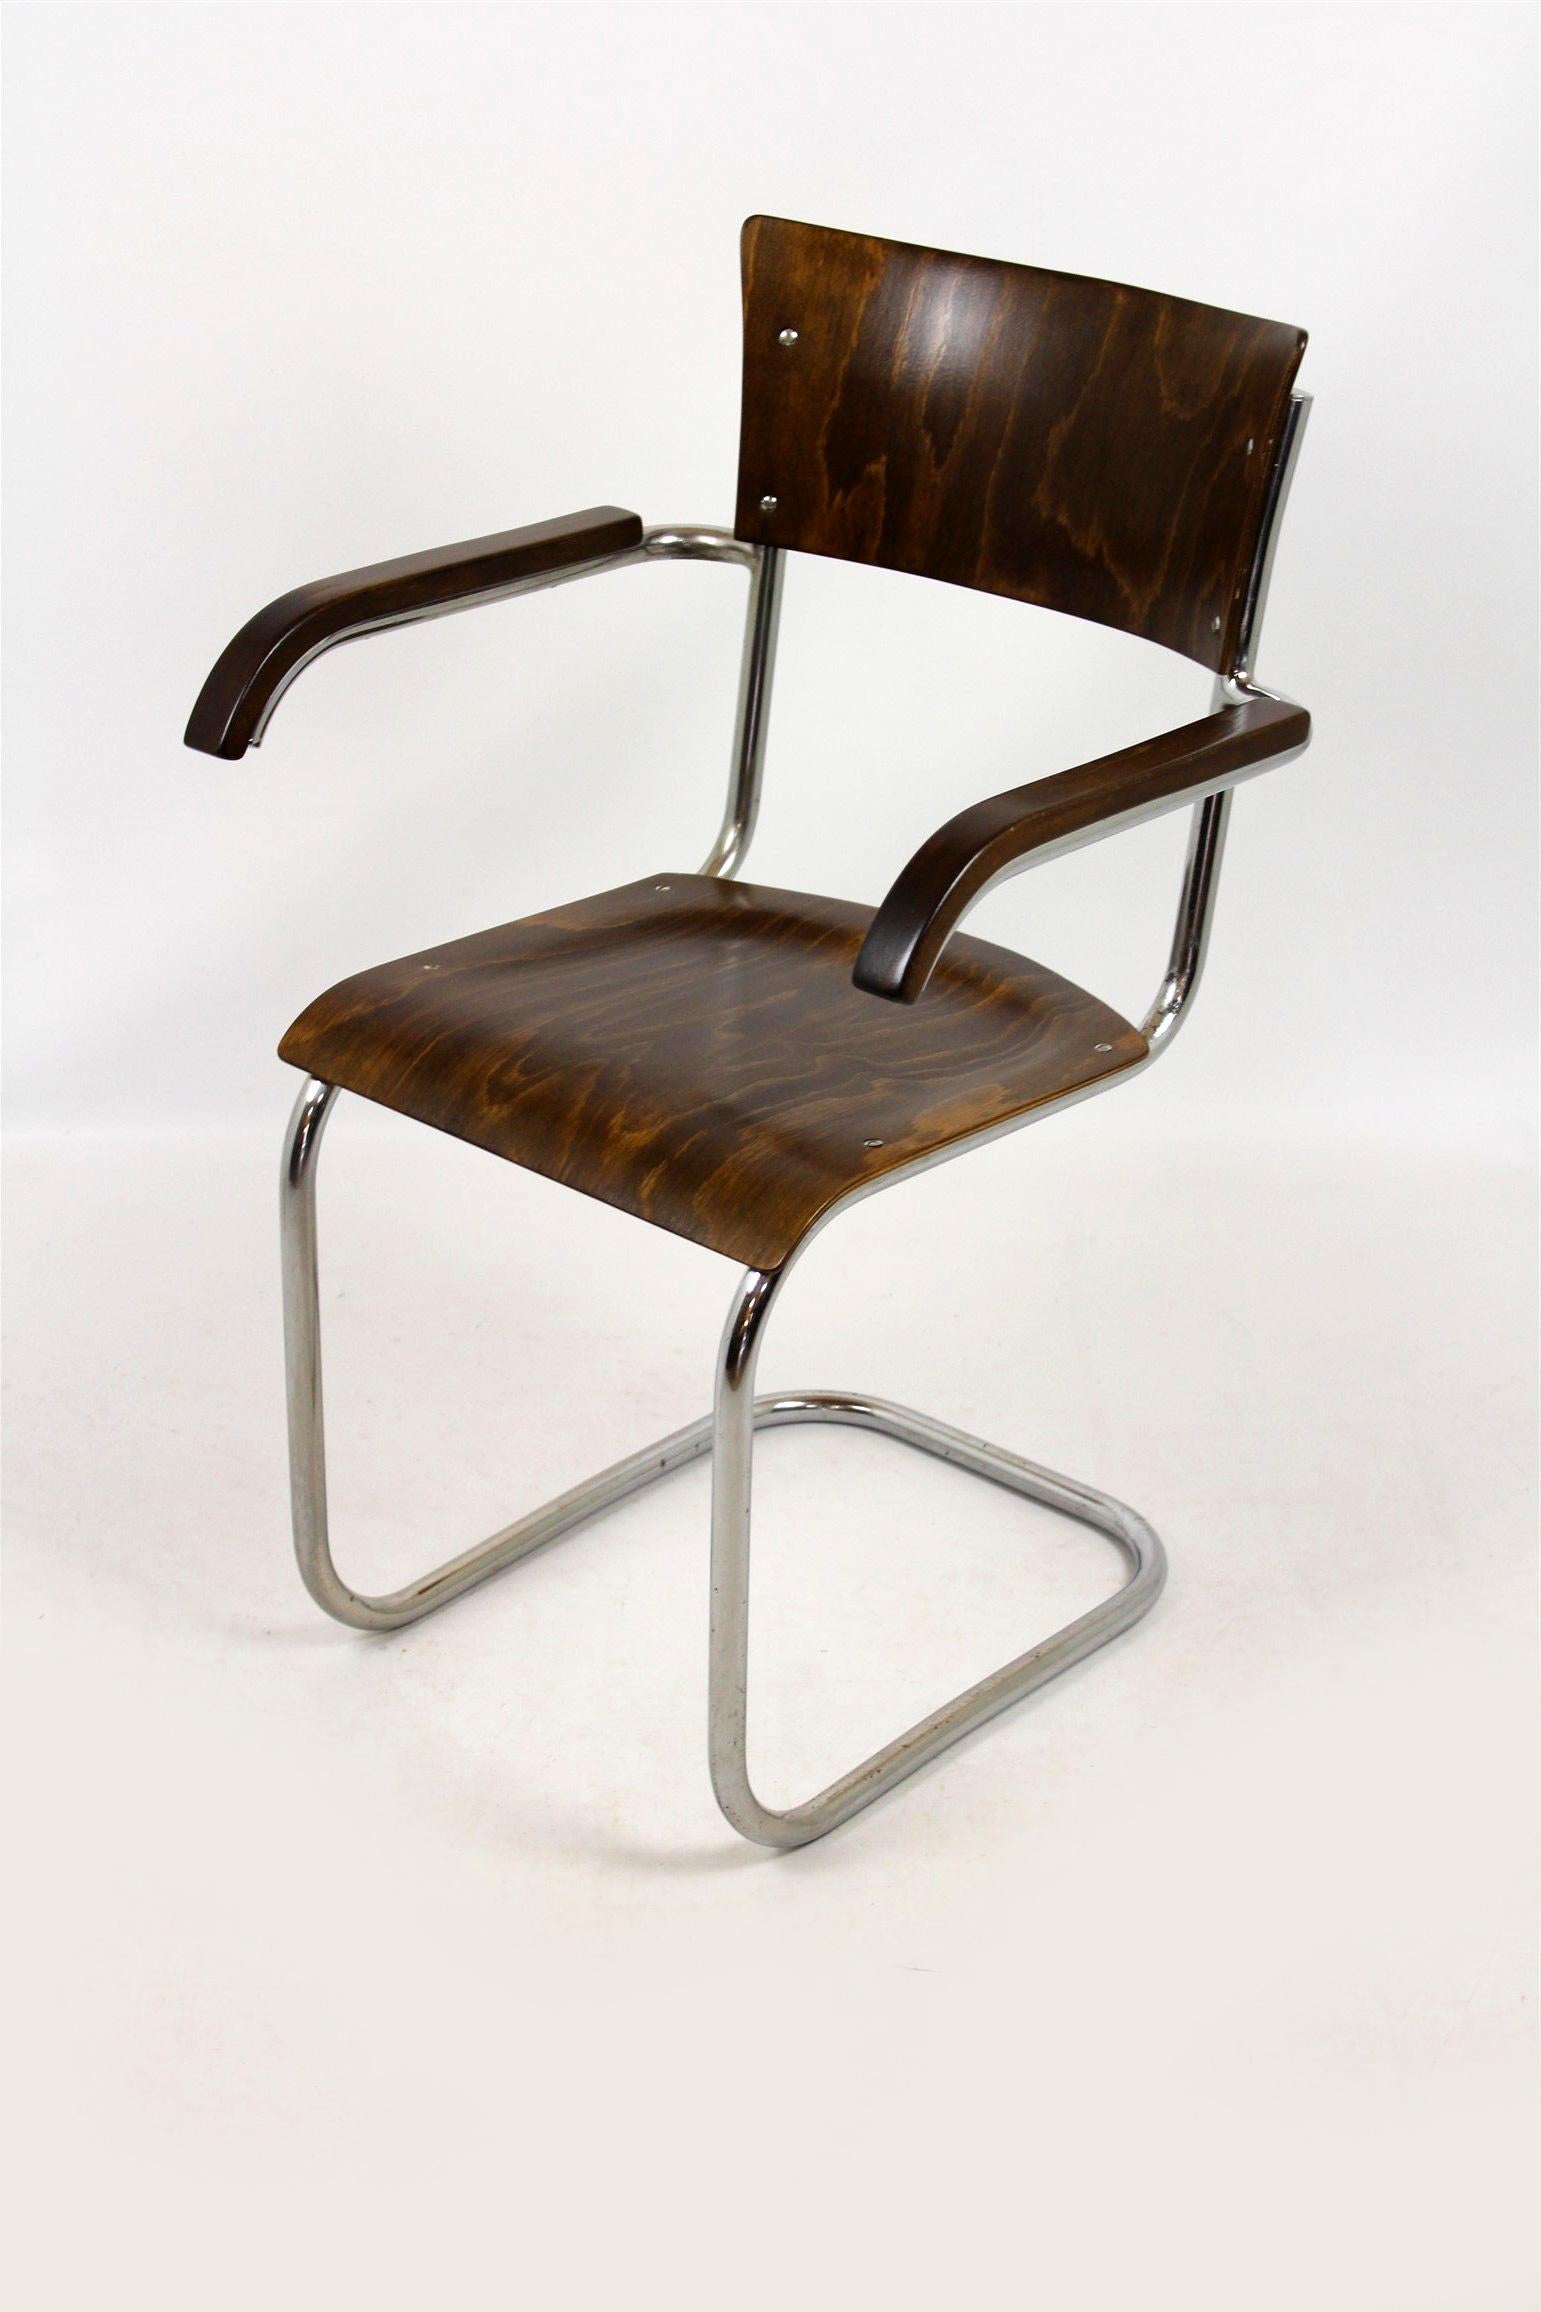 Fn 6 Cantilever Chair by Mart Stam for Mücke-Melder, 1930s For Sale 3